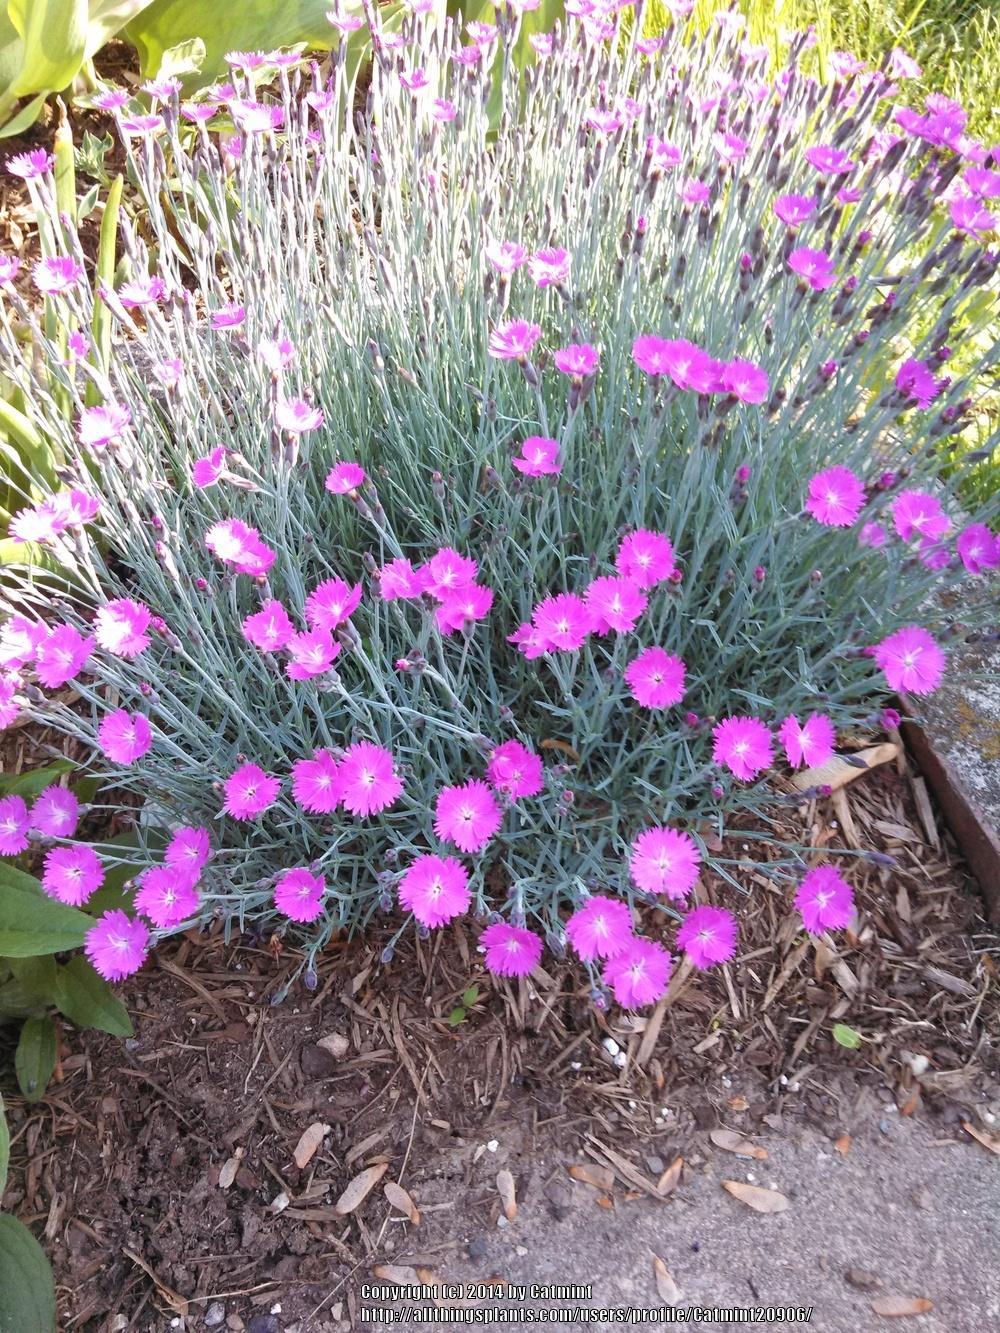 Photo of Cheddar Pink (Dianthus gratianopolitanus 'Feuerhexe') uploaded by Catmint20906